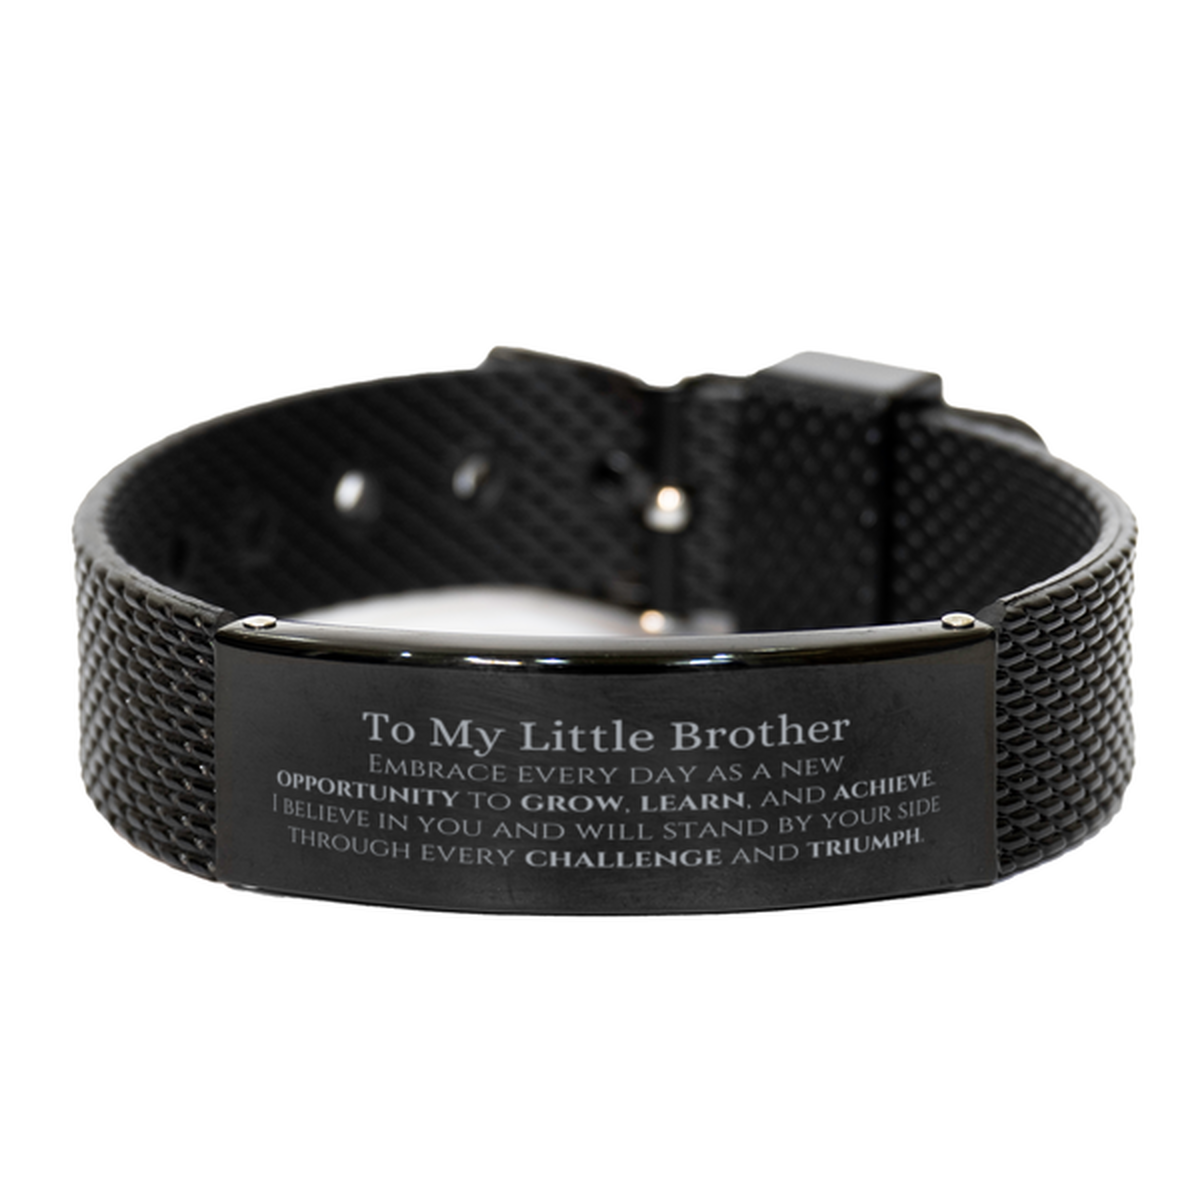 To My Little Brother Gifts, I believe in you and will stand by your side, Inspirational Black Shark Mesh Bracelet For Little Brother, Birthday Christmas Motivational Little Brother Gifts